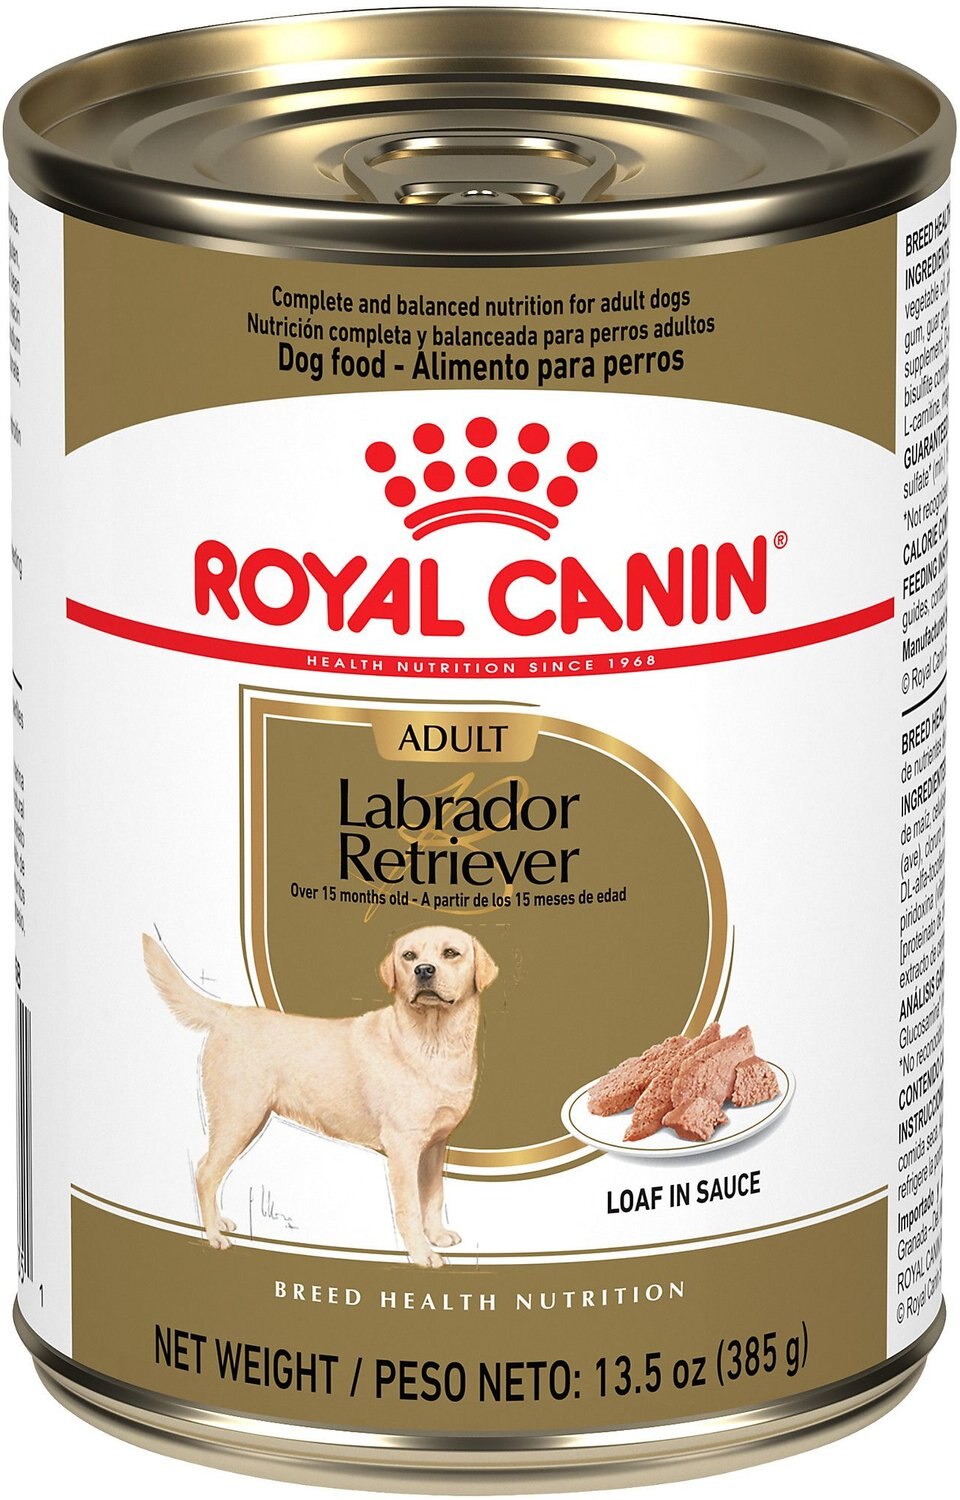 ROYAL CANIN Labrador Retriever Loaf in Sauce Canned Dog Food, 13.5oz, case of 12